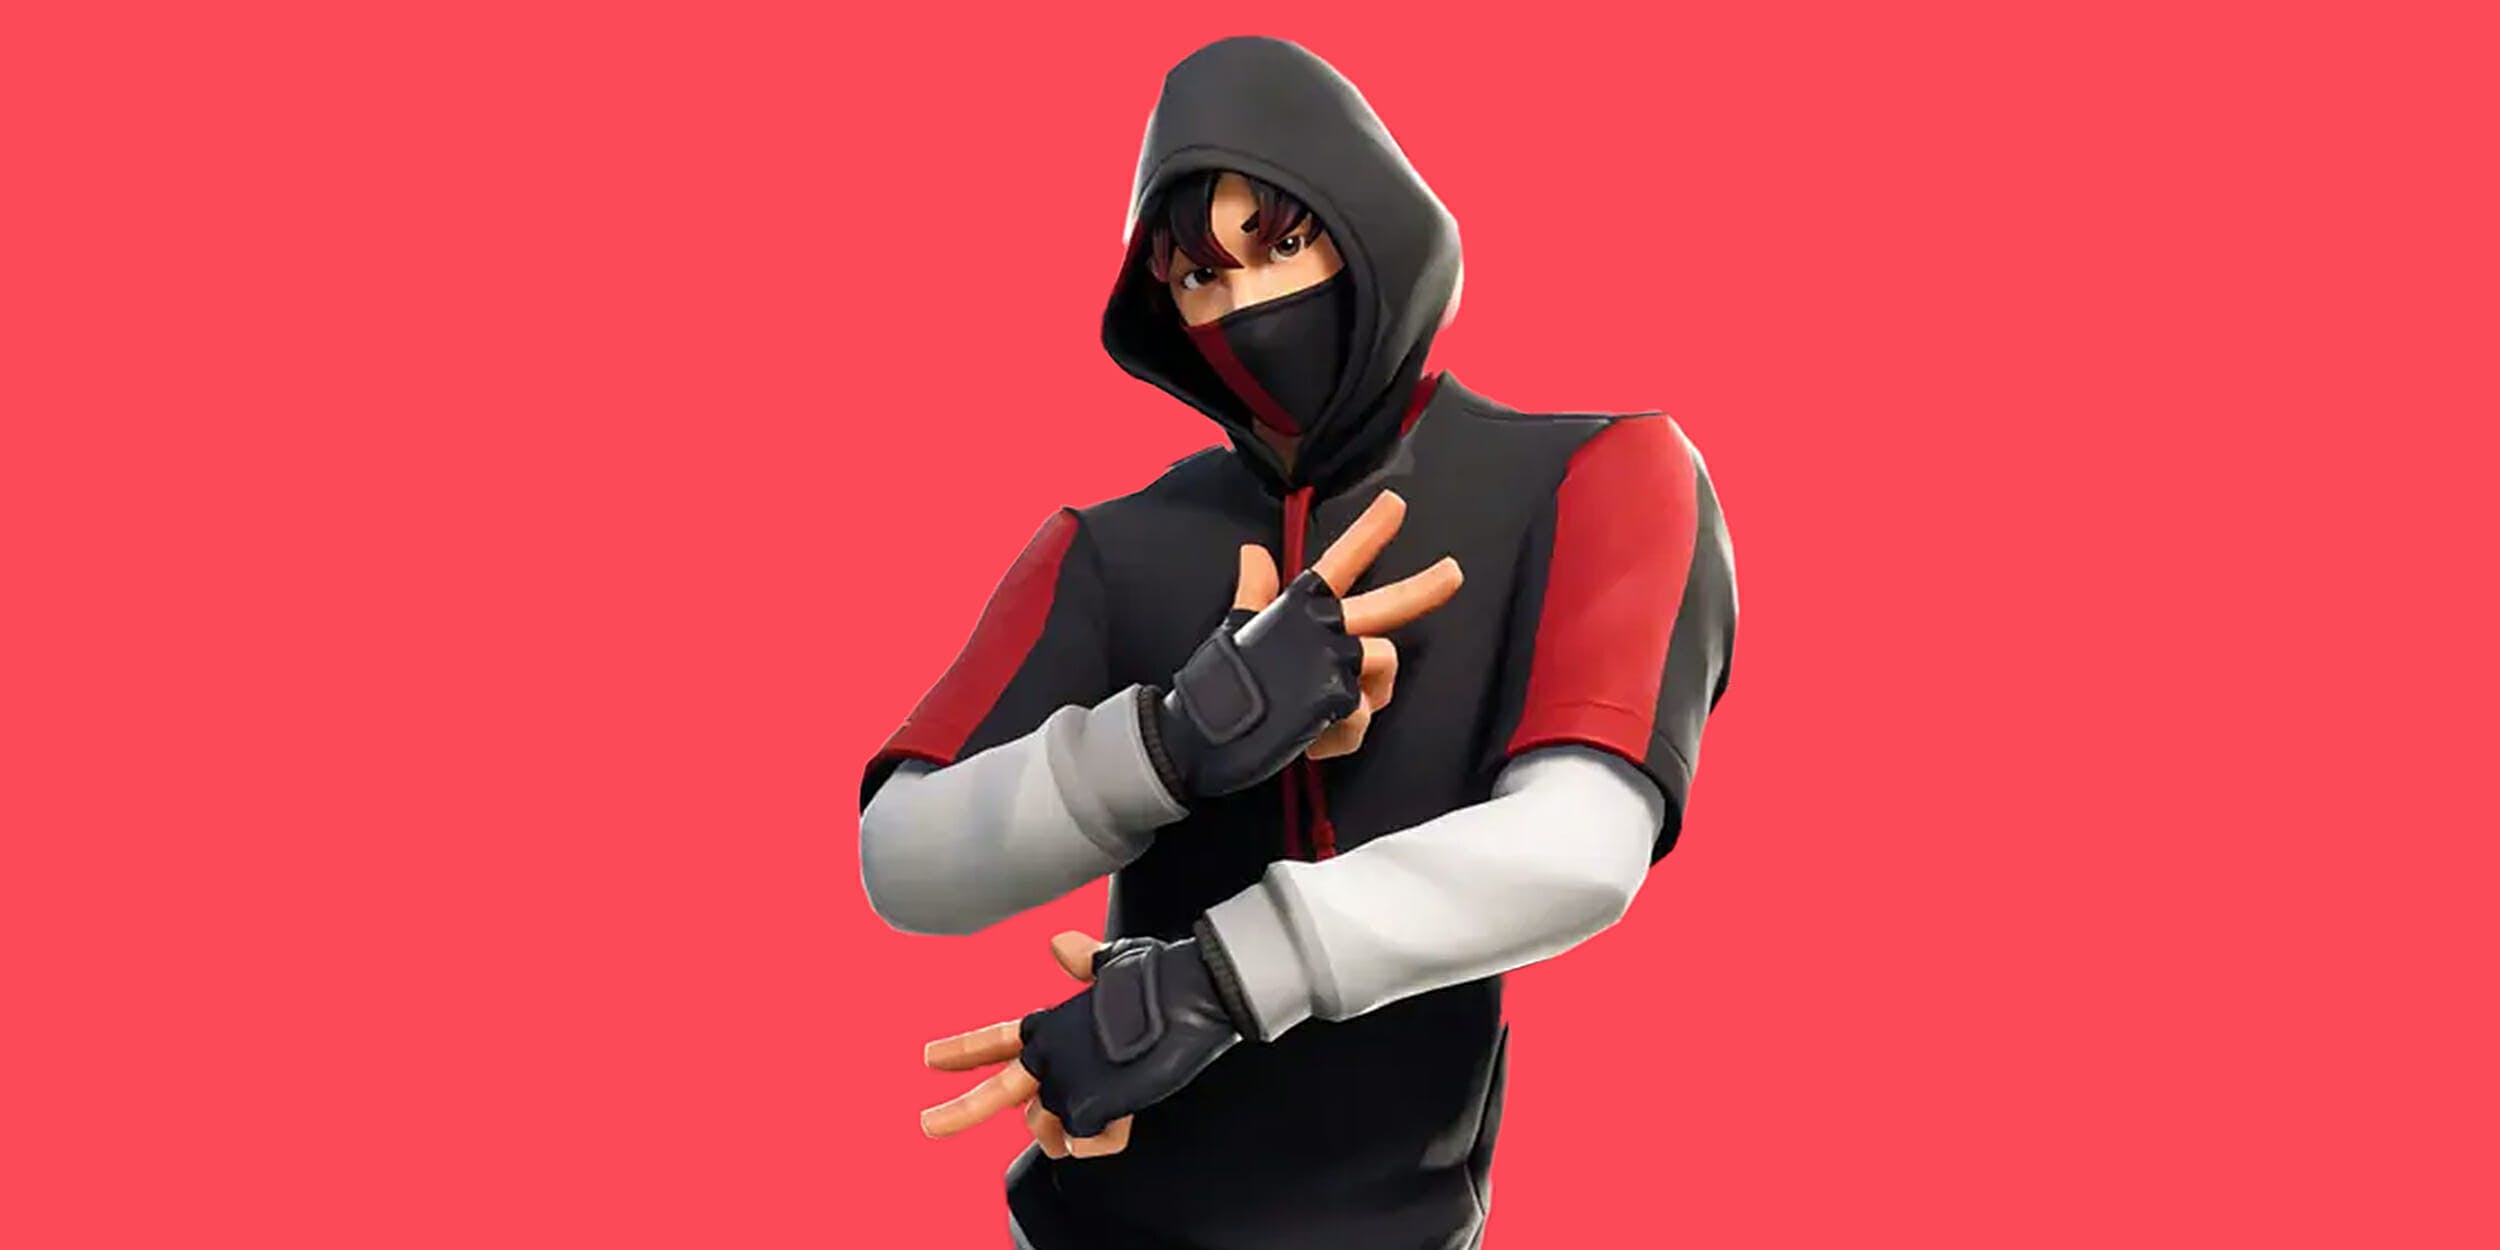 A character from Fortnite wearing a black and red hoodie and a mask - Fortnite